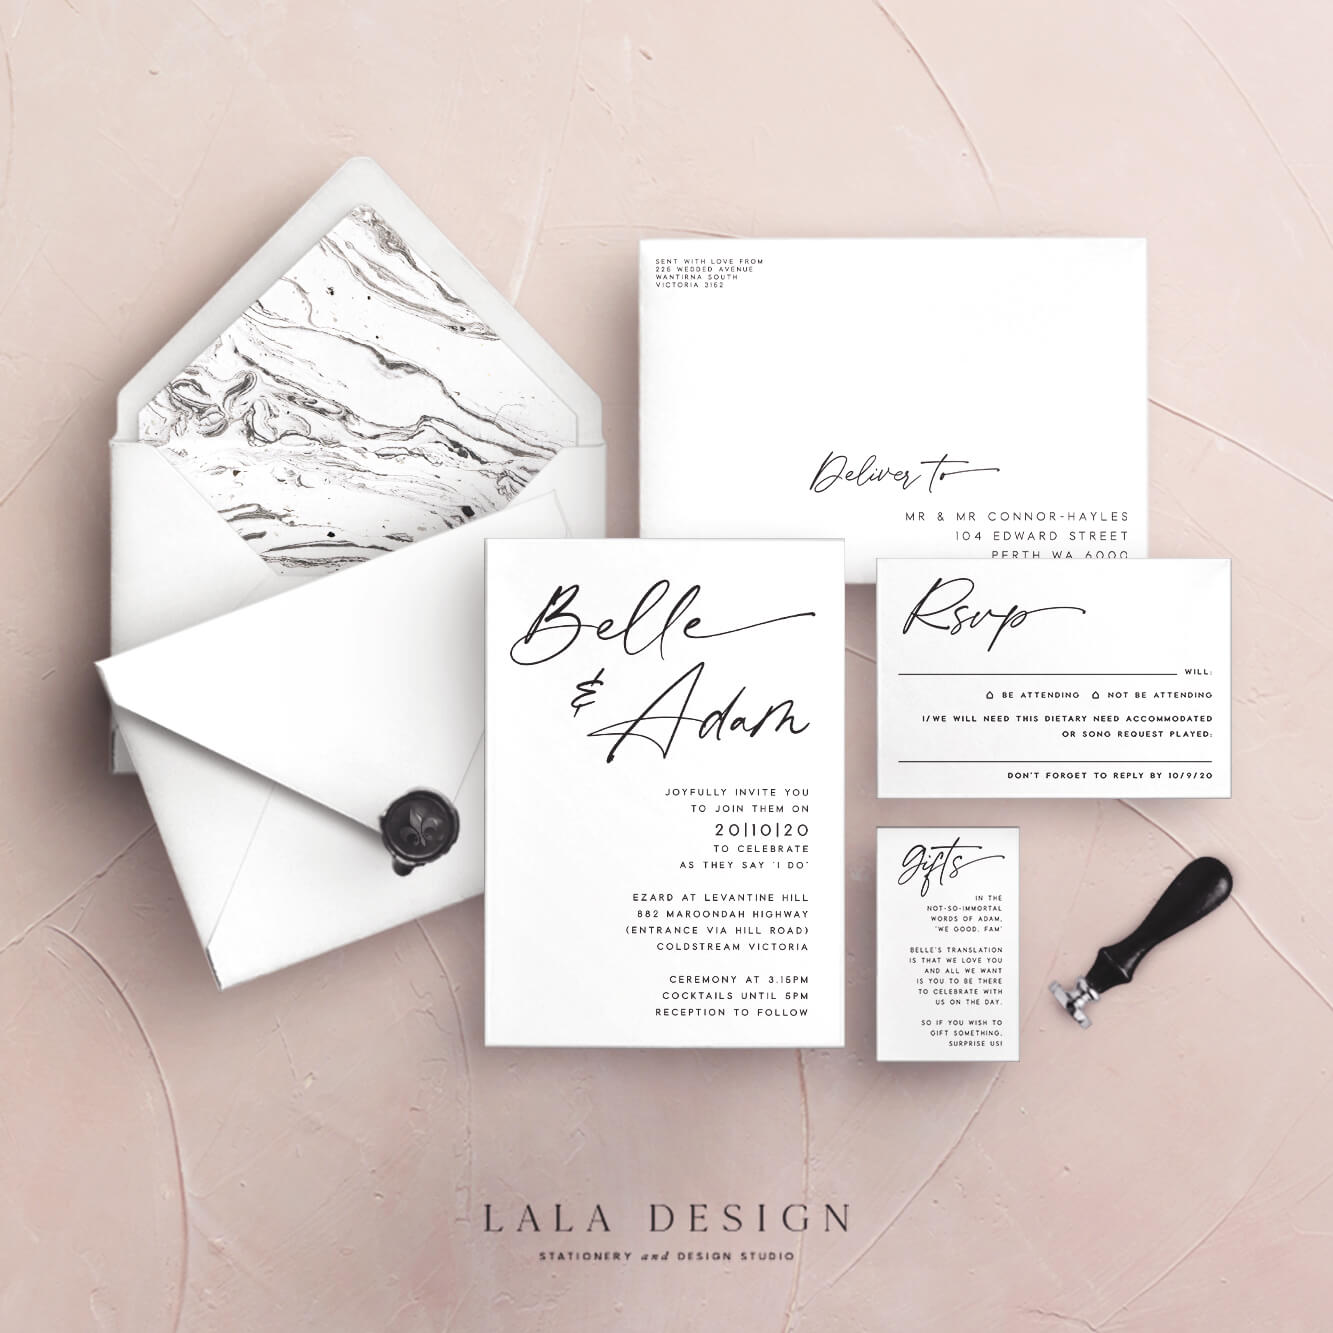 Wedding stationery complete sets | Belle - Perth WA